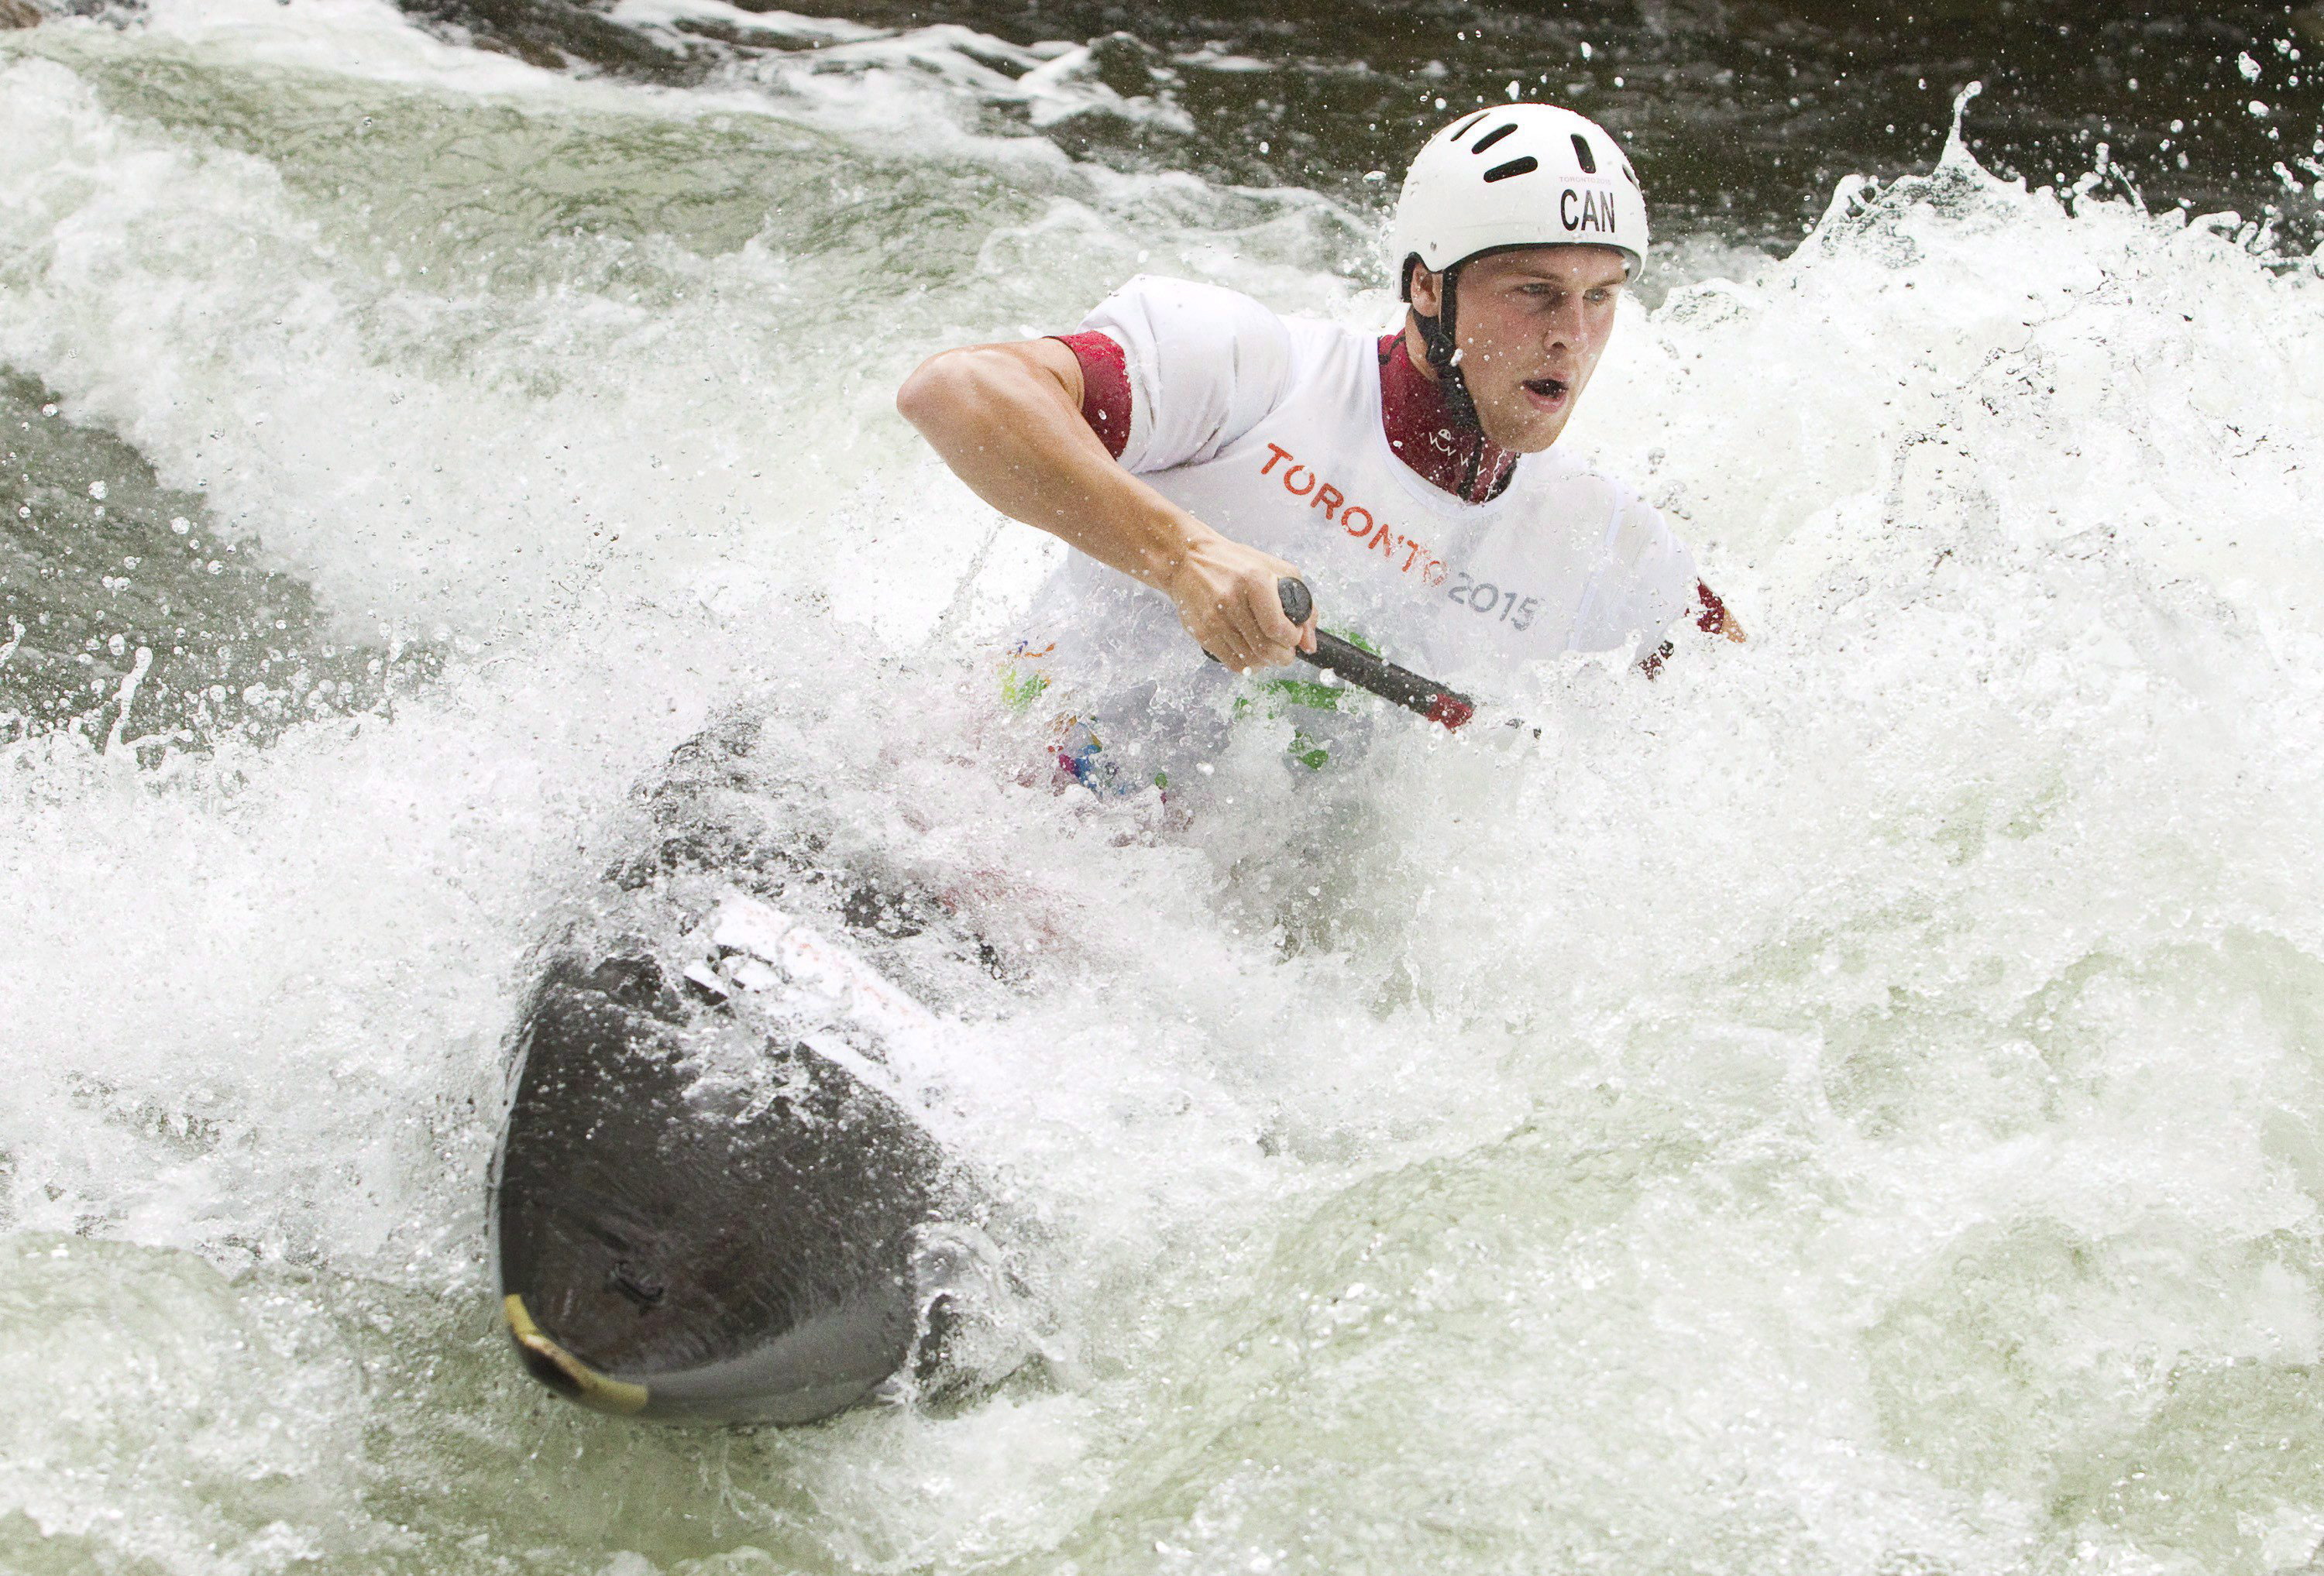 Canada's Cameron Smedley makes his semi-final run at the Minden white water course in the Men's Solo Canoe Slalom at the Toronto 2015 Pan Am Games in Minden, Ont., on Sunday, July 19, 2015. THE CANADIAN PRESS/Fred Thornhill